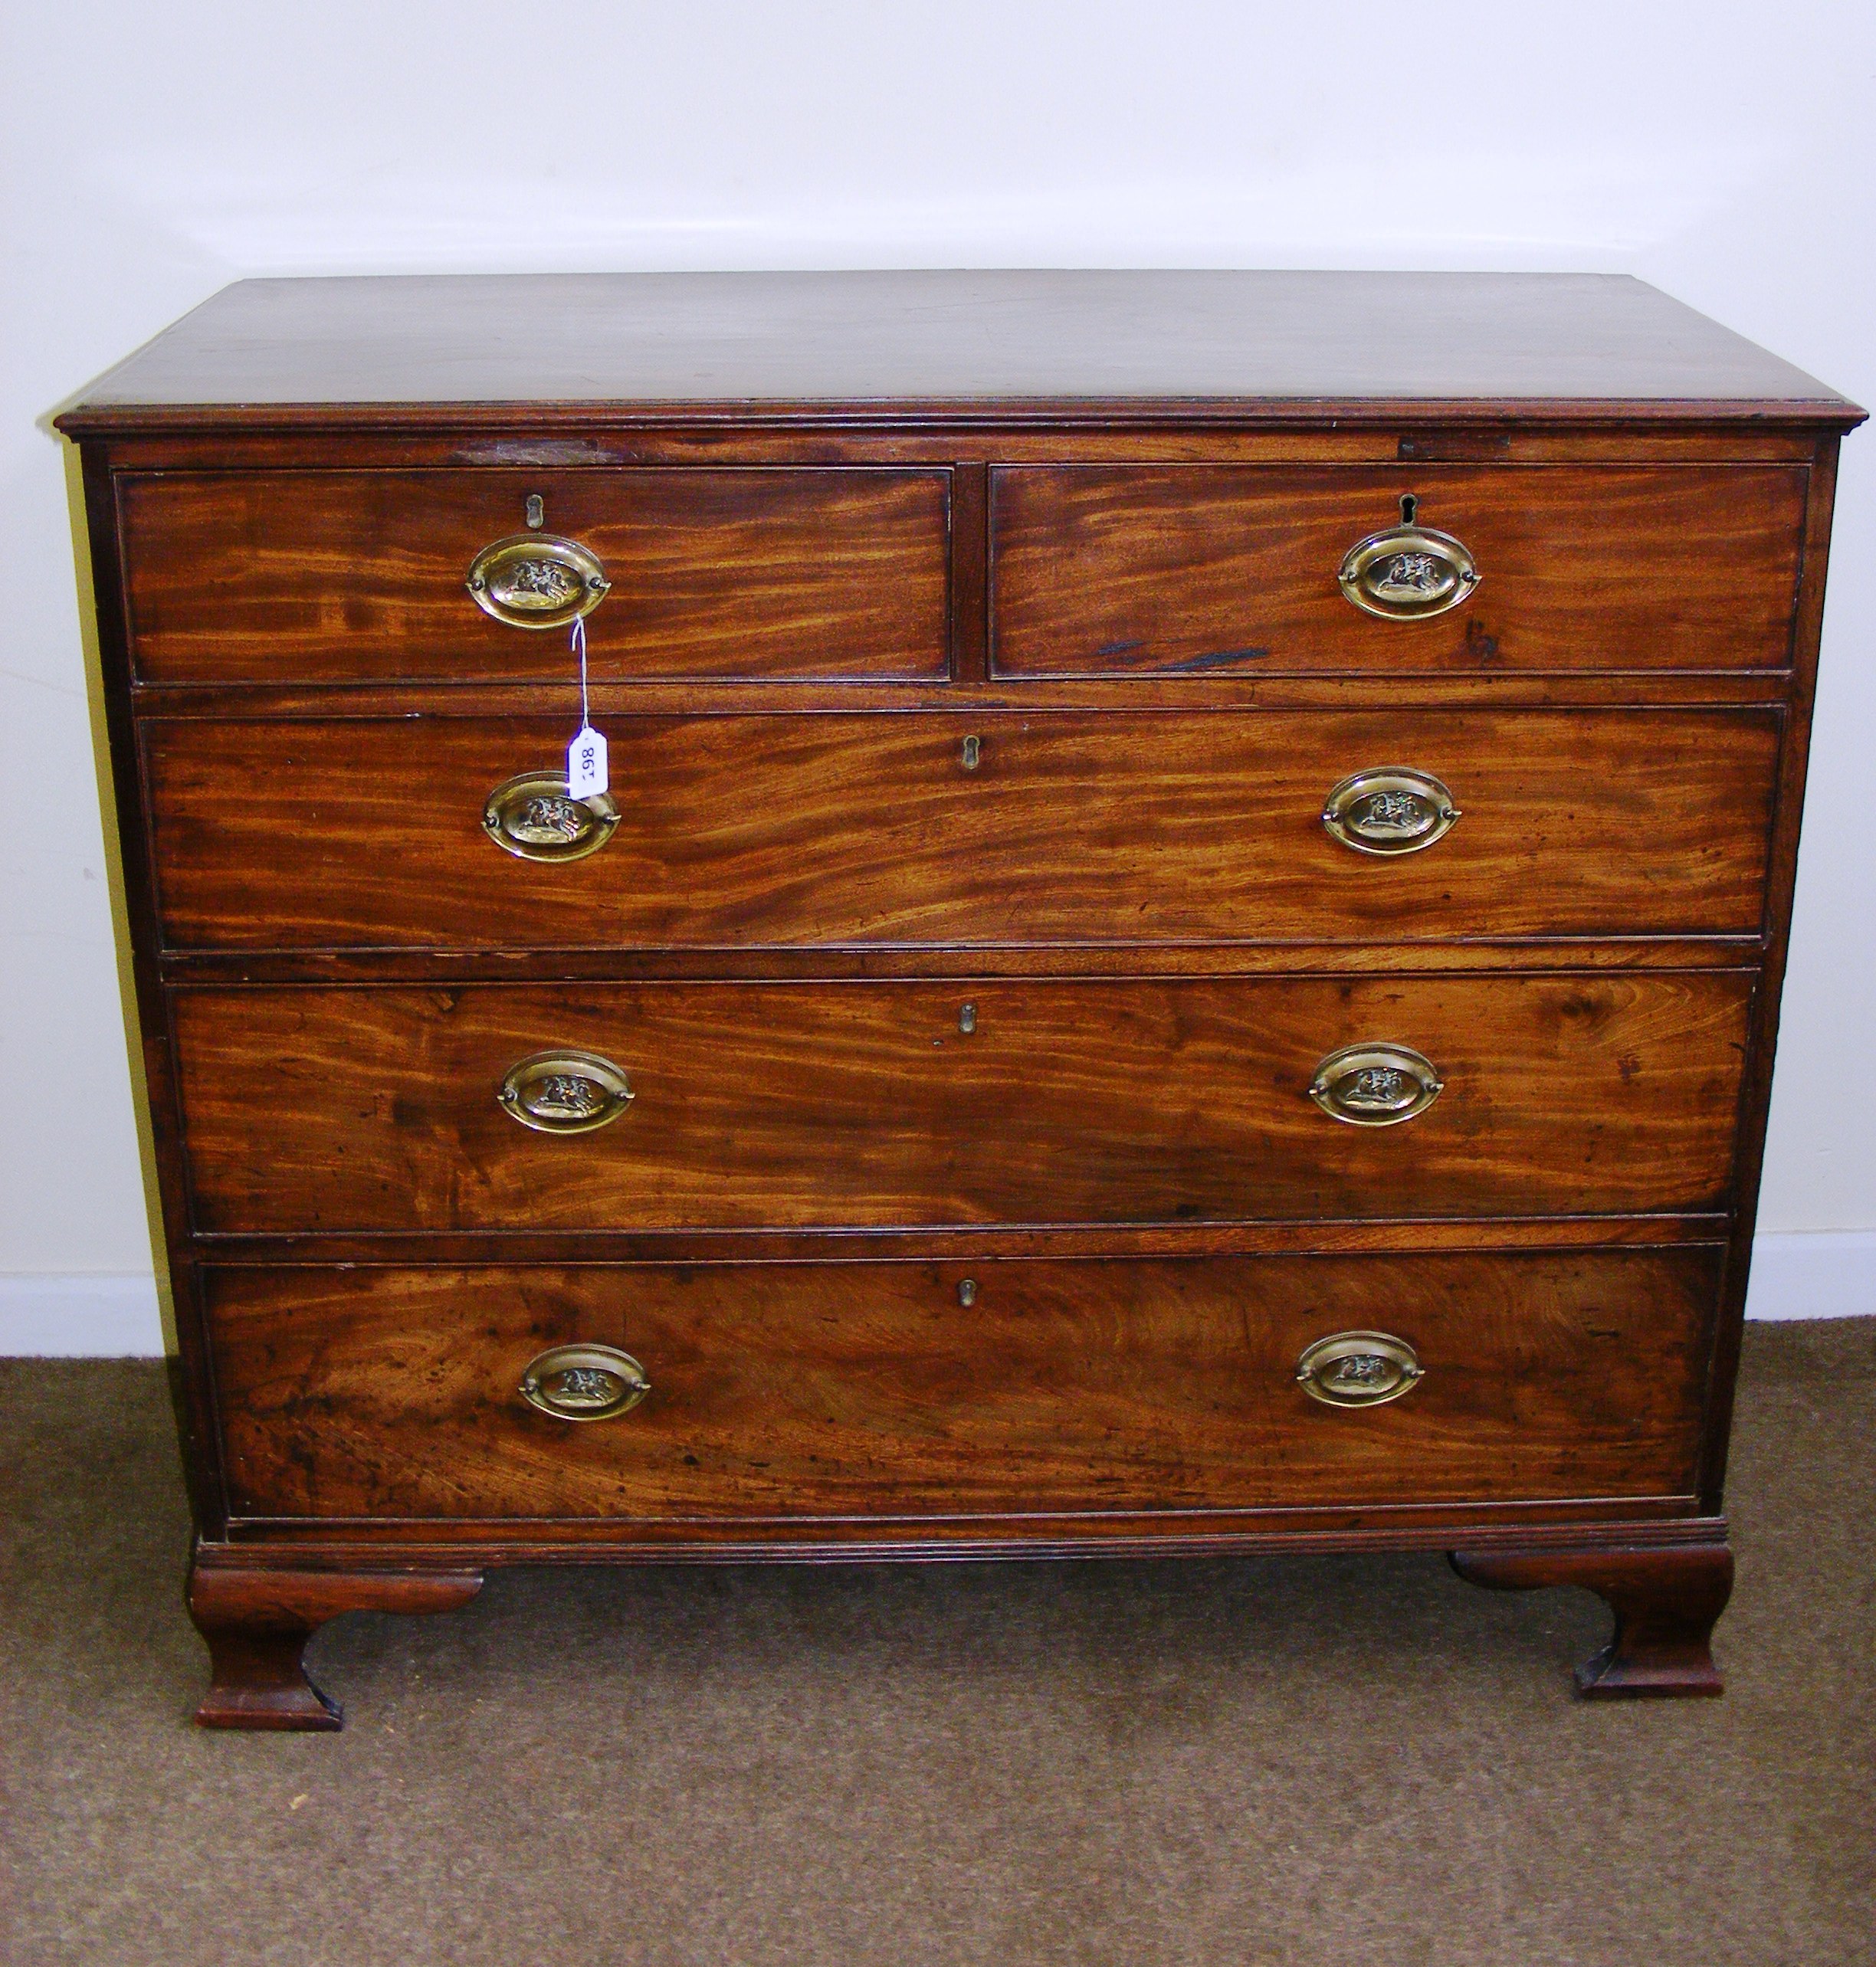 A Georgian two over three mahogany chest of drawers with decorative brass handles on four feet (one